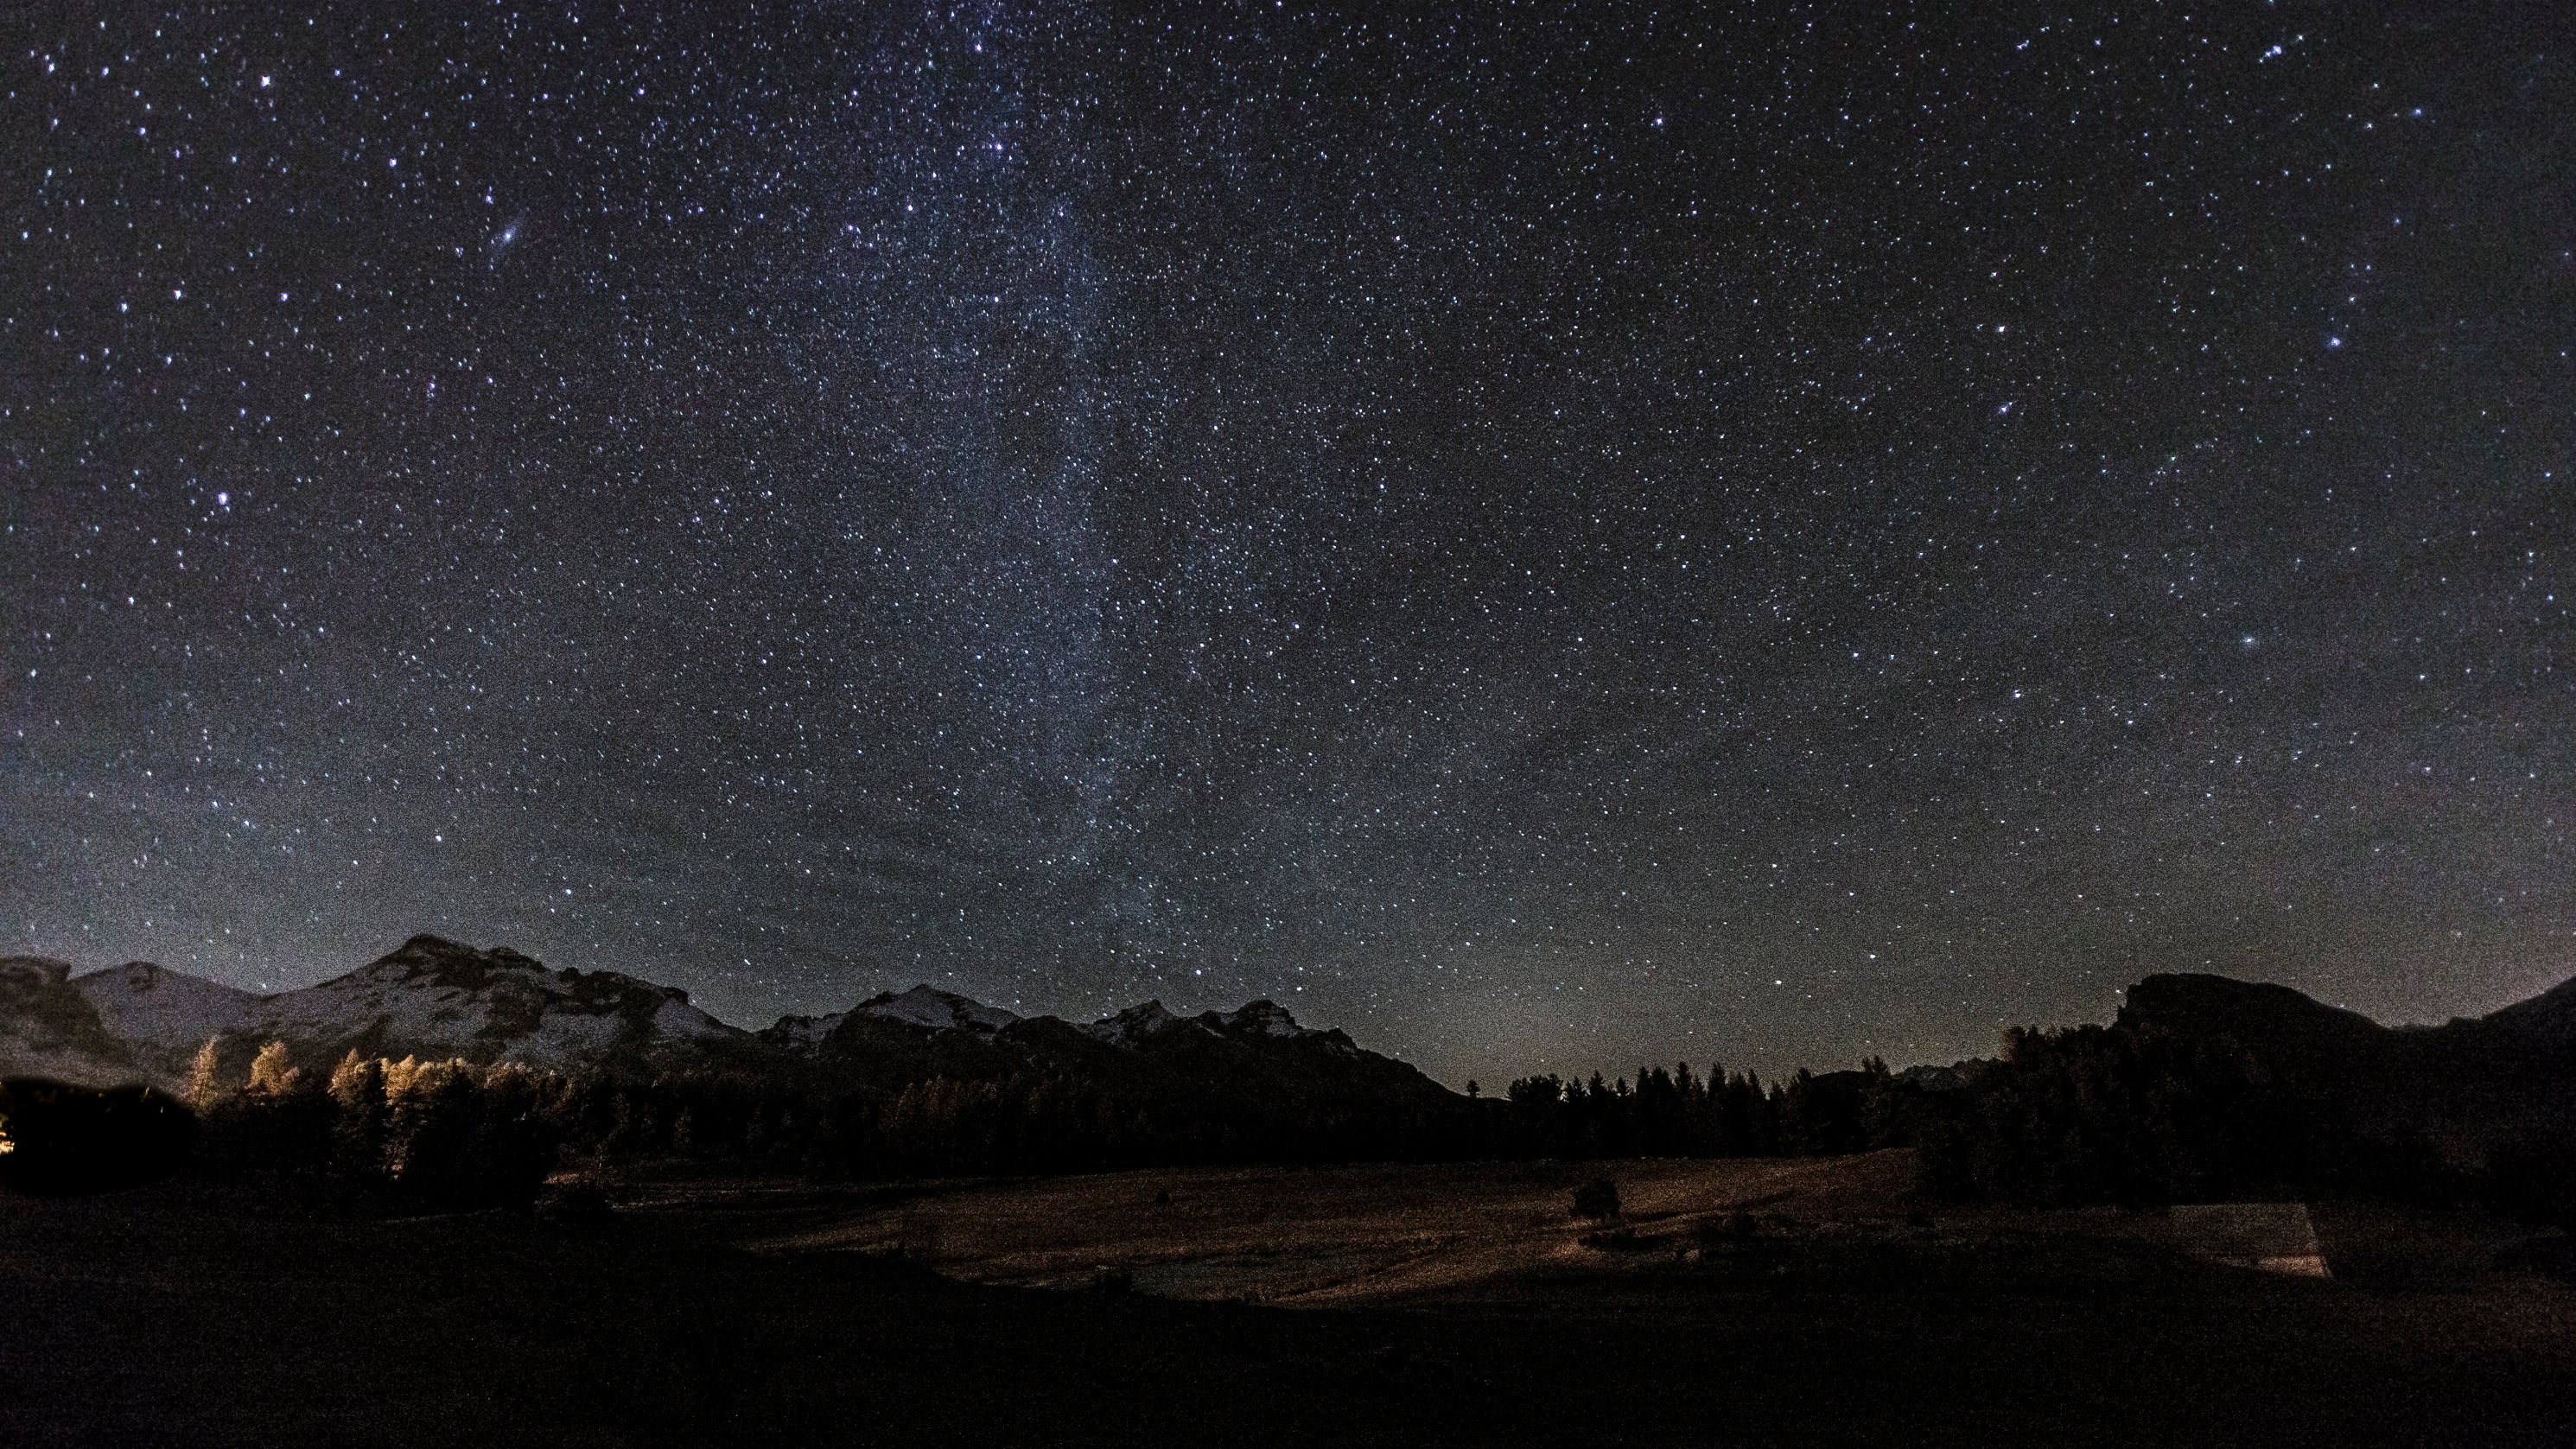 Landscape night scene of mountains and the stars